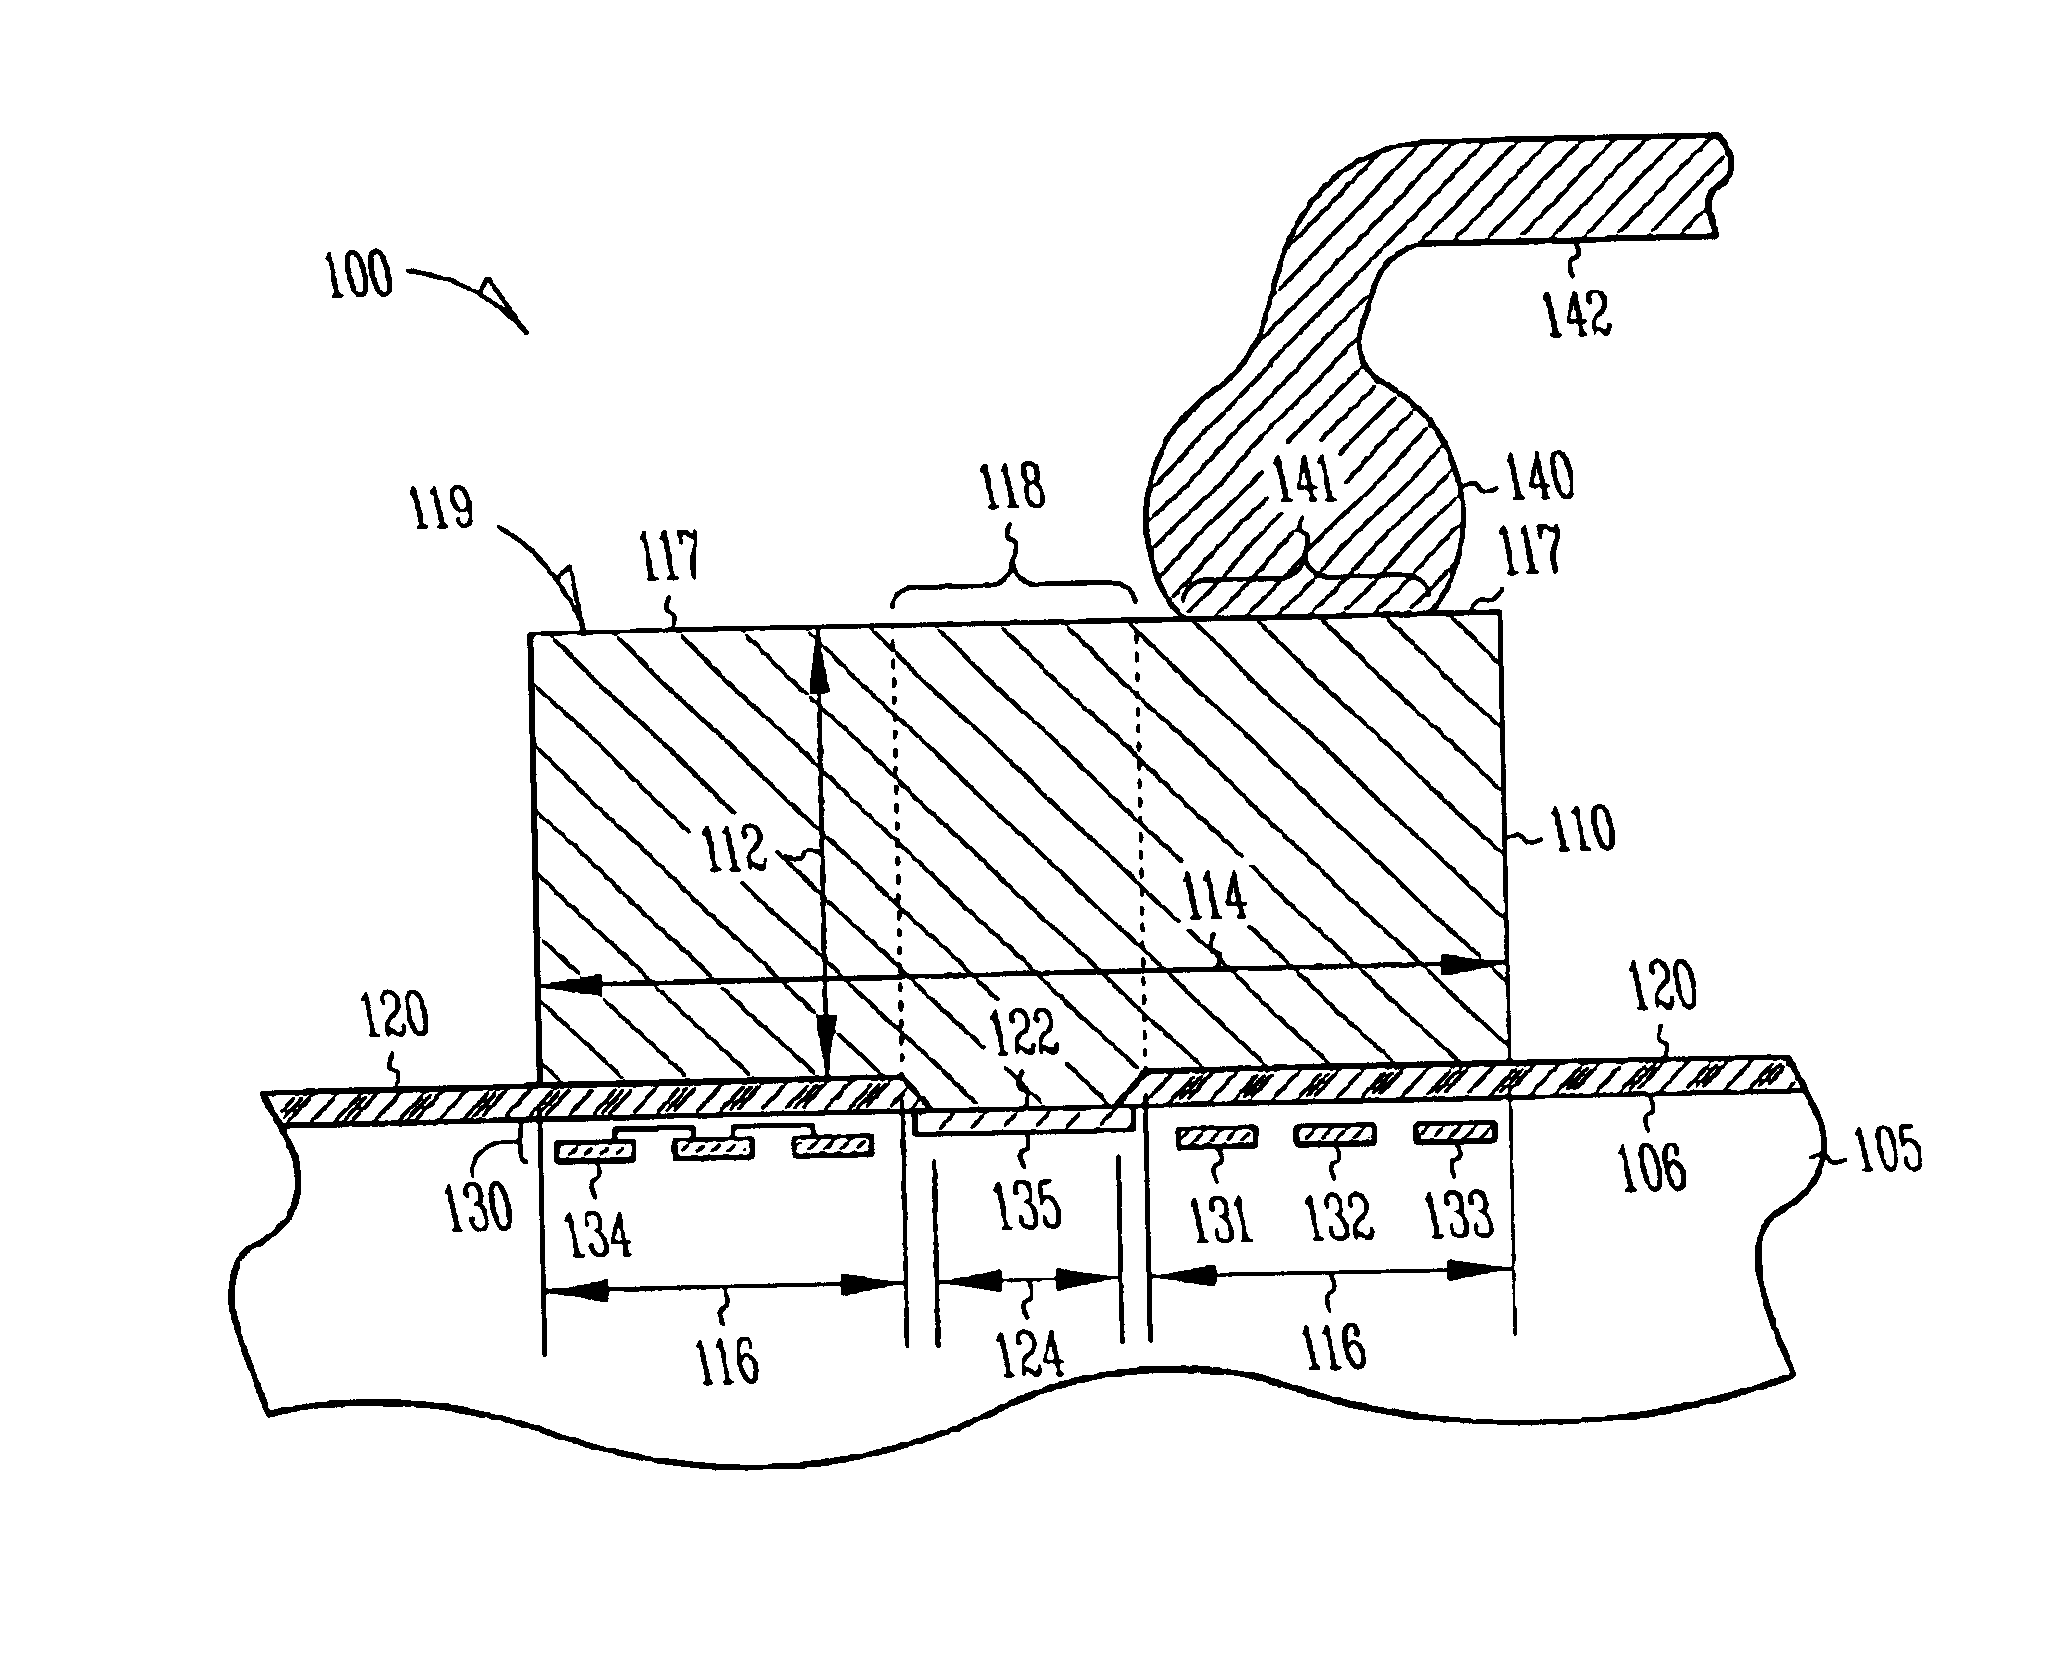 Apparatus and method extending flip-chip pad structures for wirebonding on low-k dielectric silicon